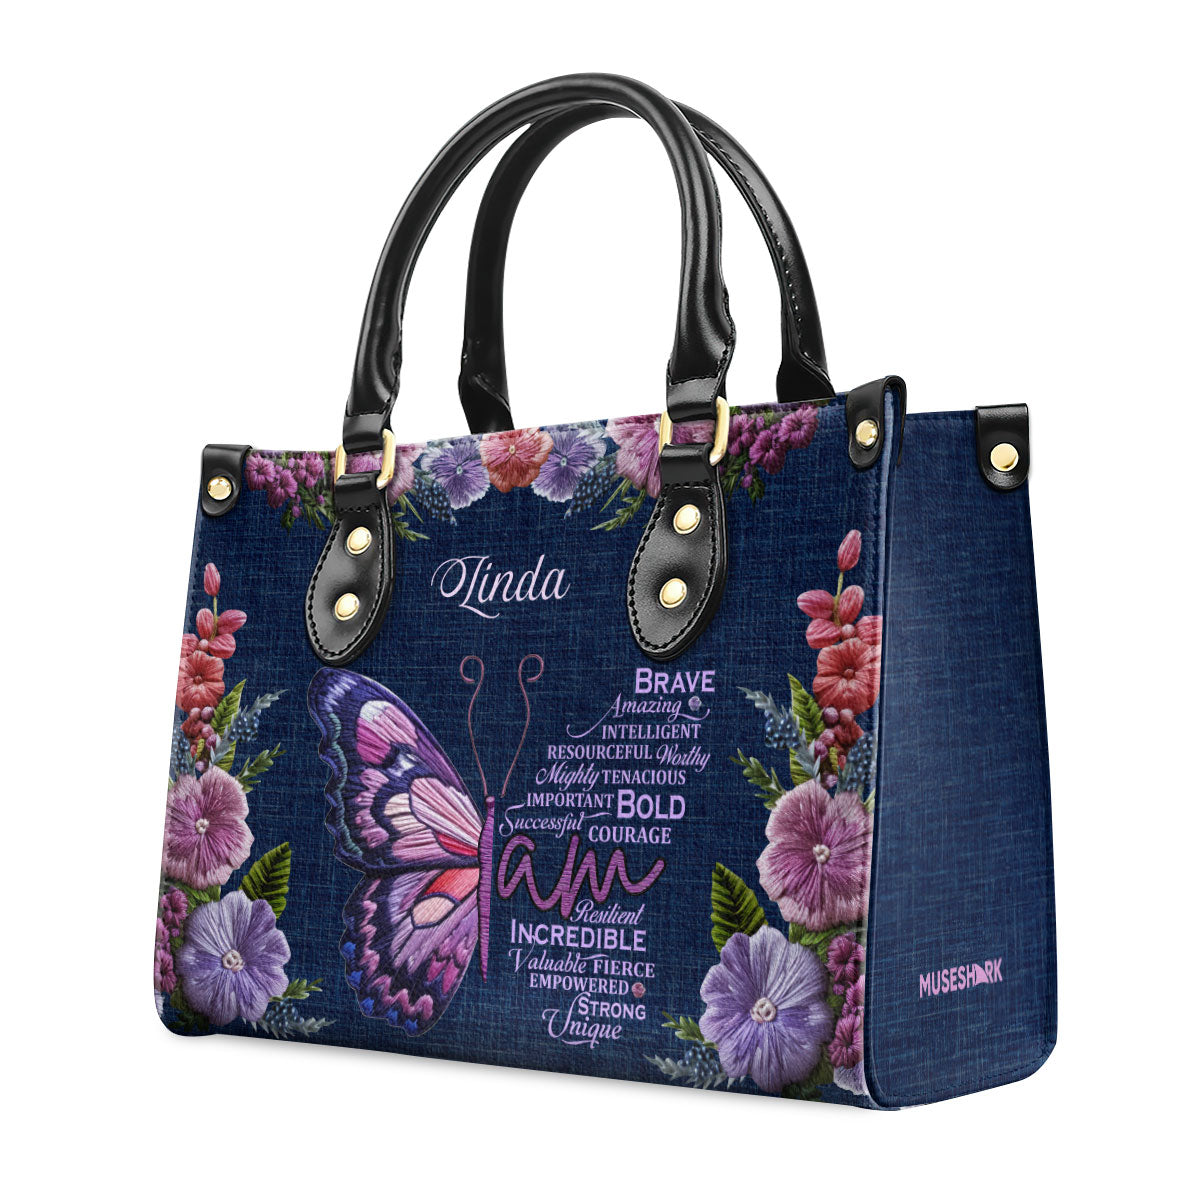 I Am Resilient - Personalized Leather Handbag MSM47